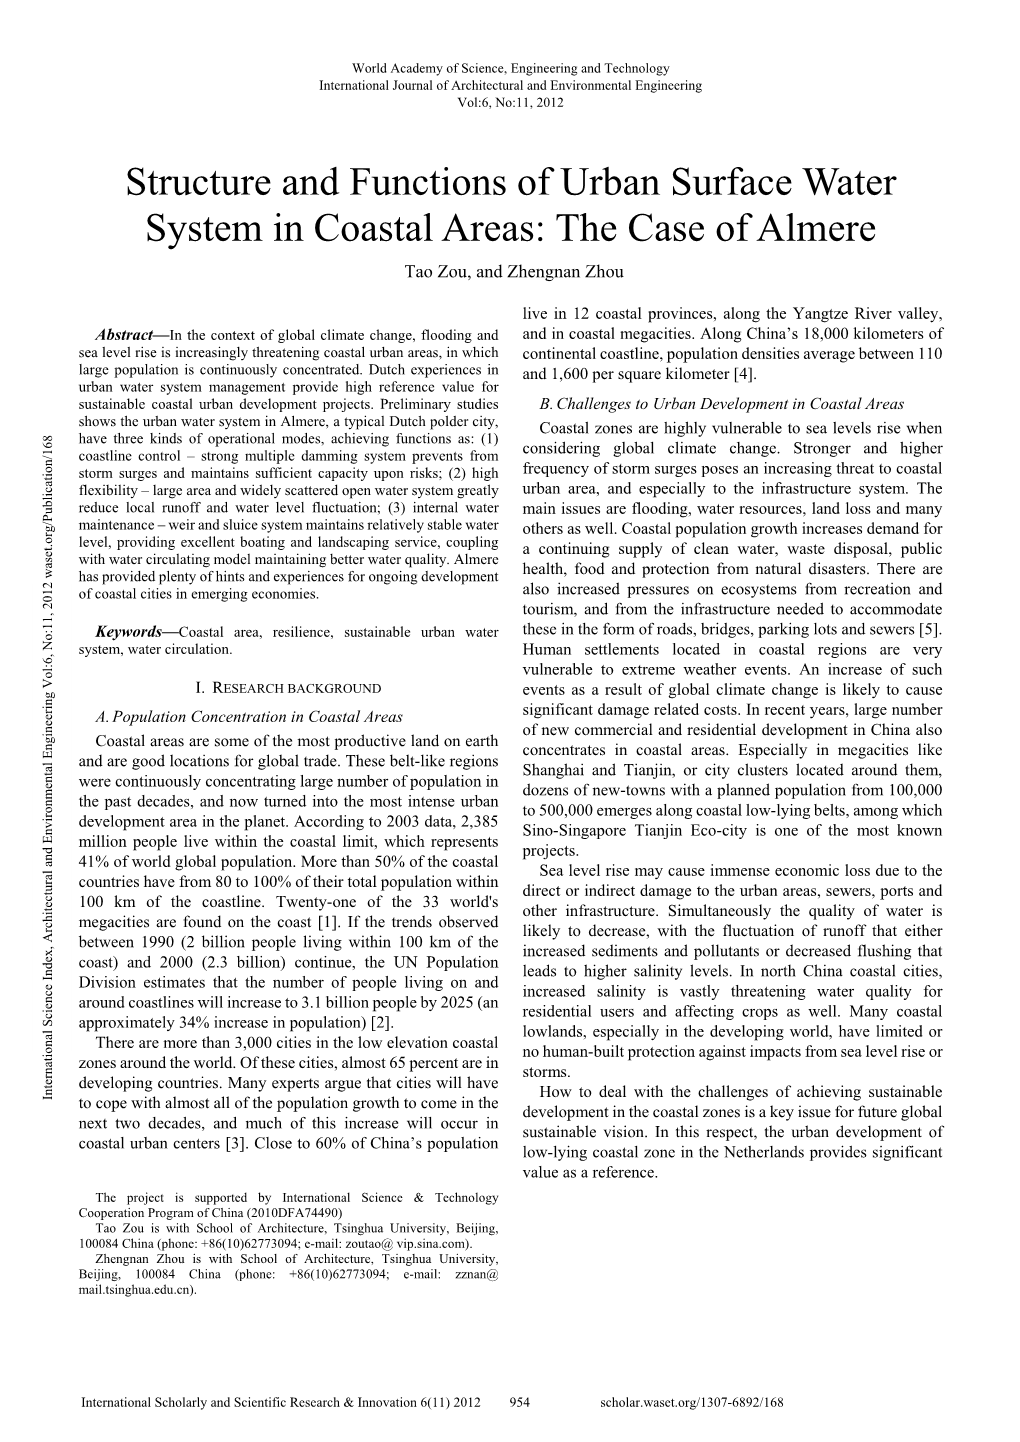 Structure and Functions of Urban Surface Water System in Coastal Areas: the Case of Almere Tao Zou, and Zhengnan Zhou